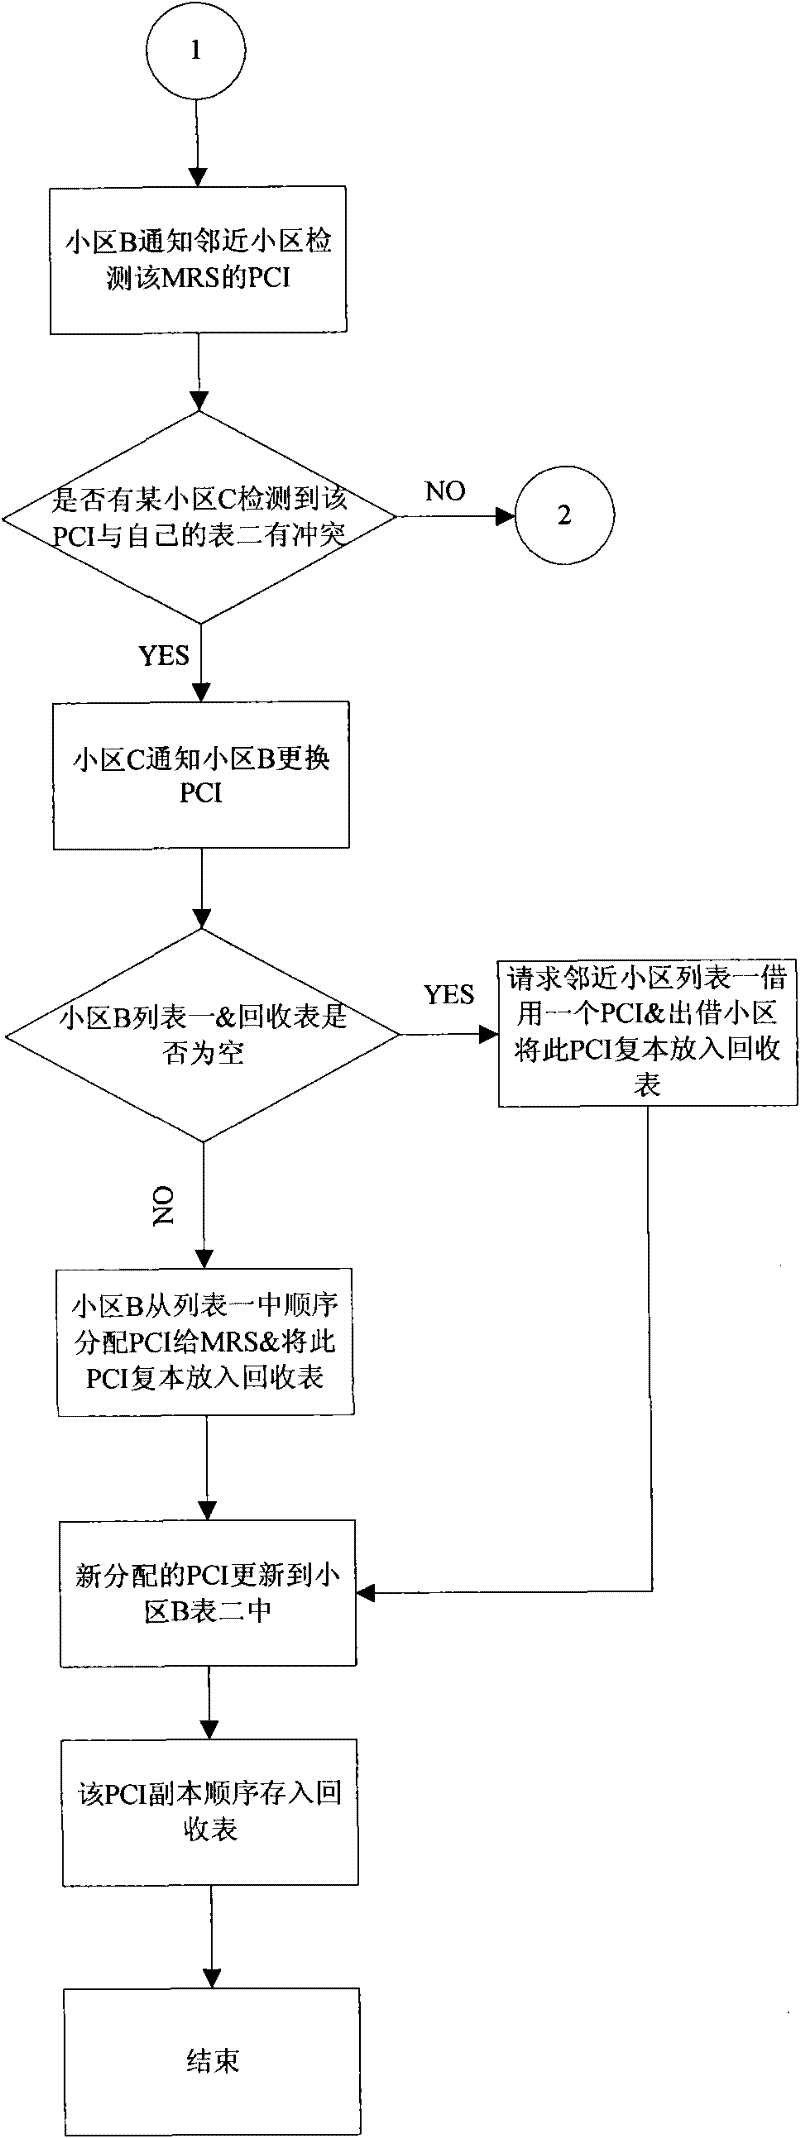 MRS (Mobile Relay Station) PCI (physical cell ID) distribution method